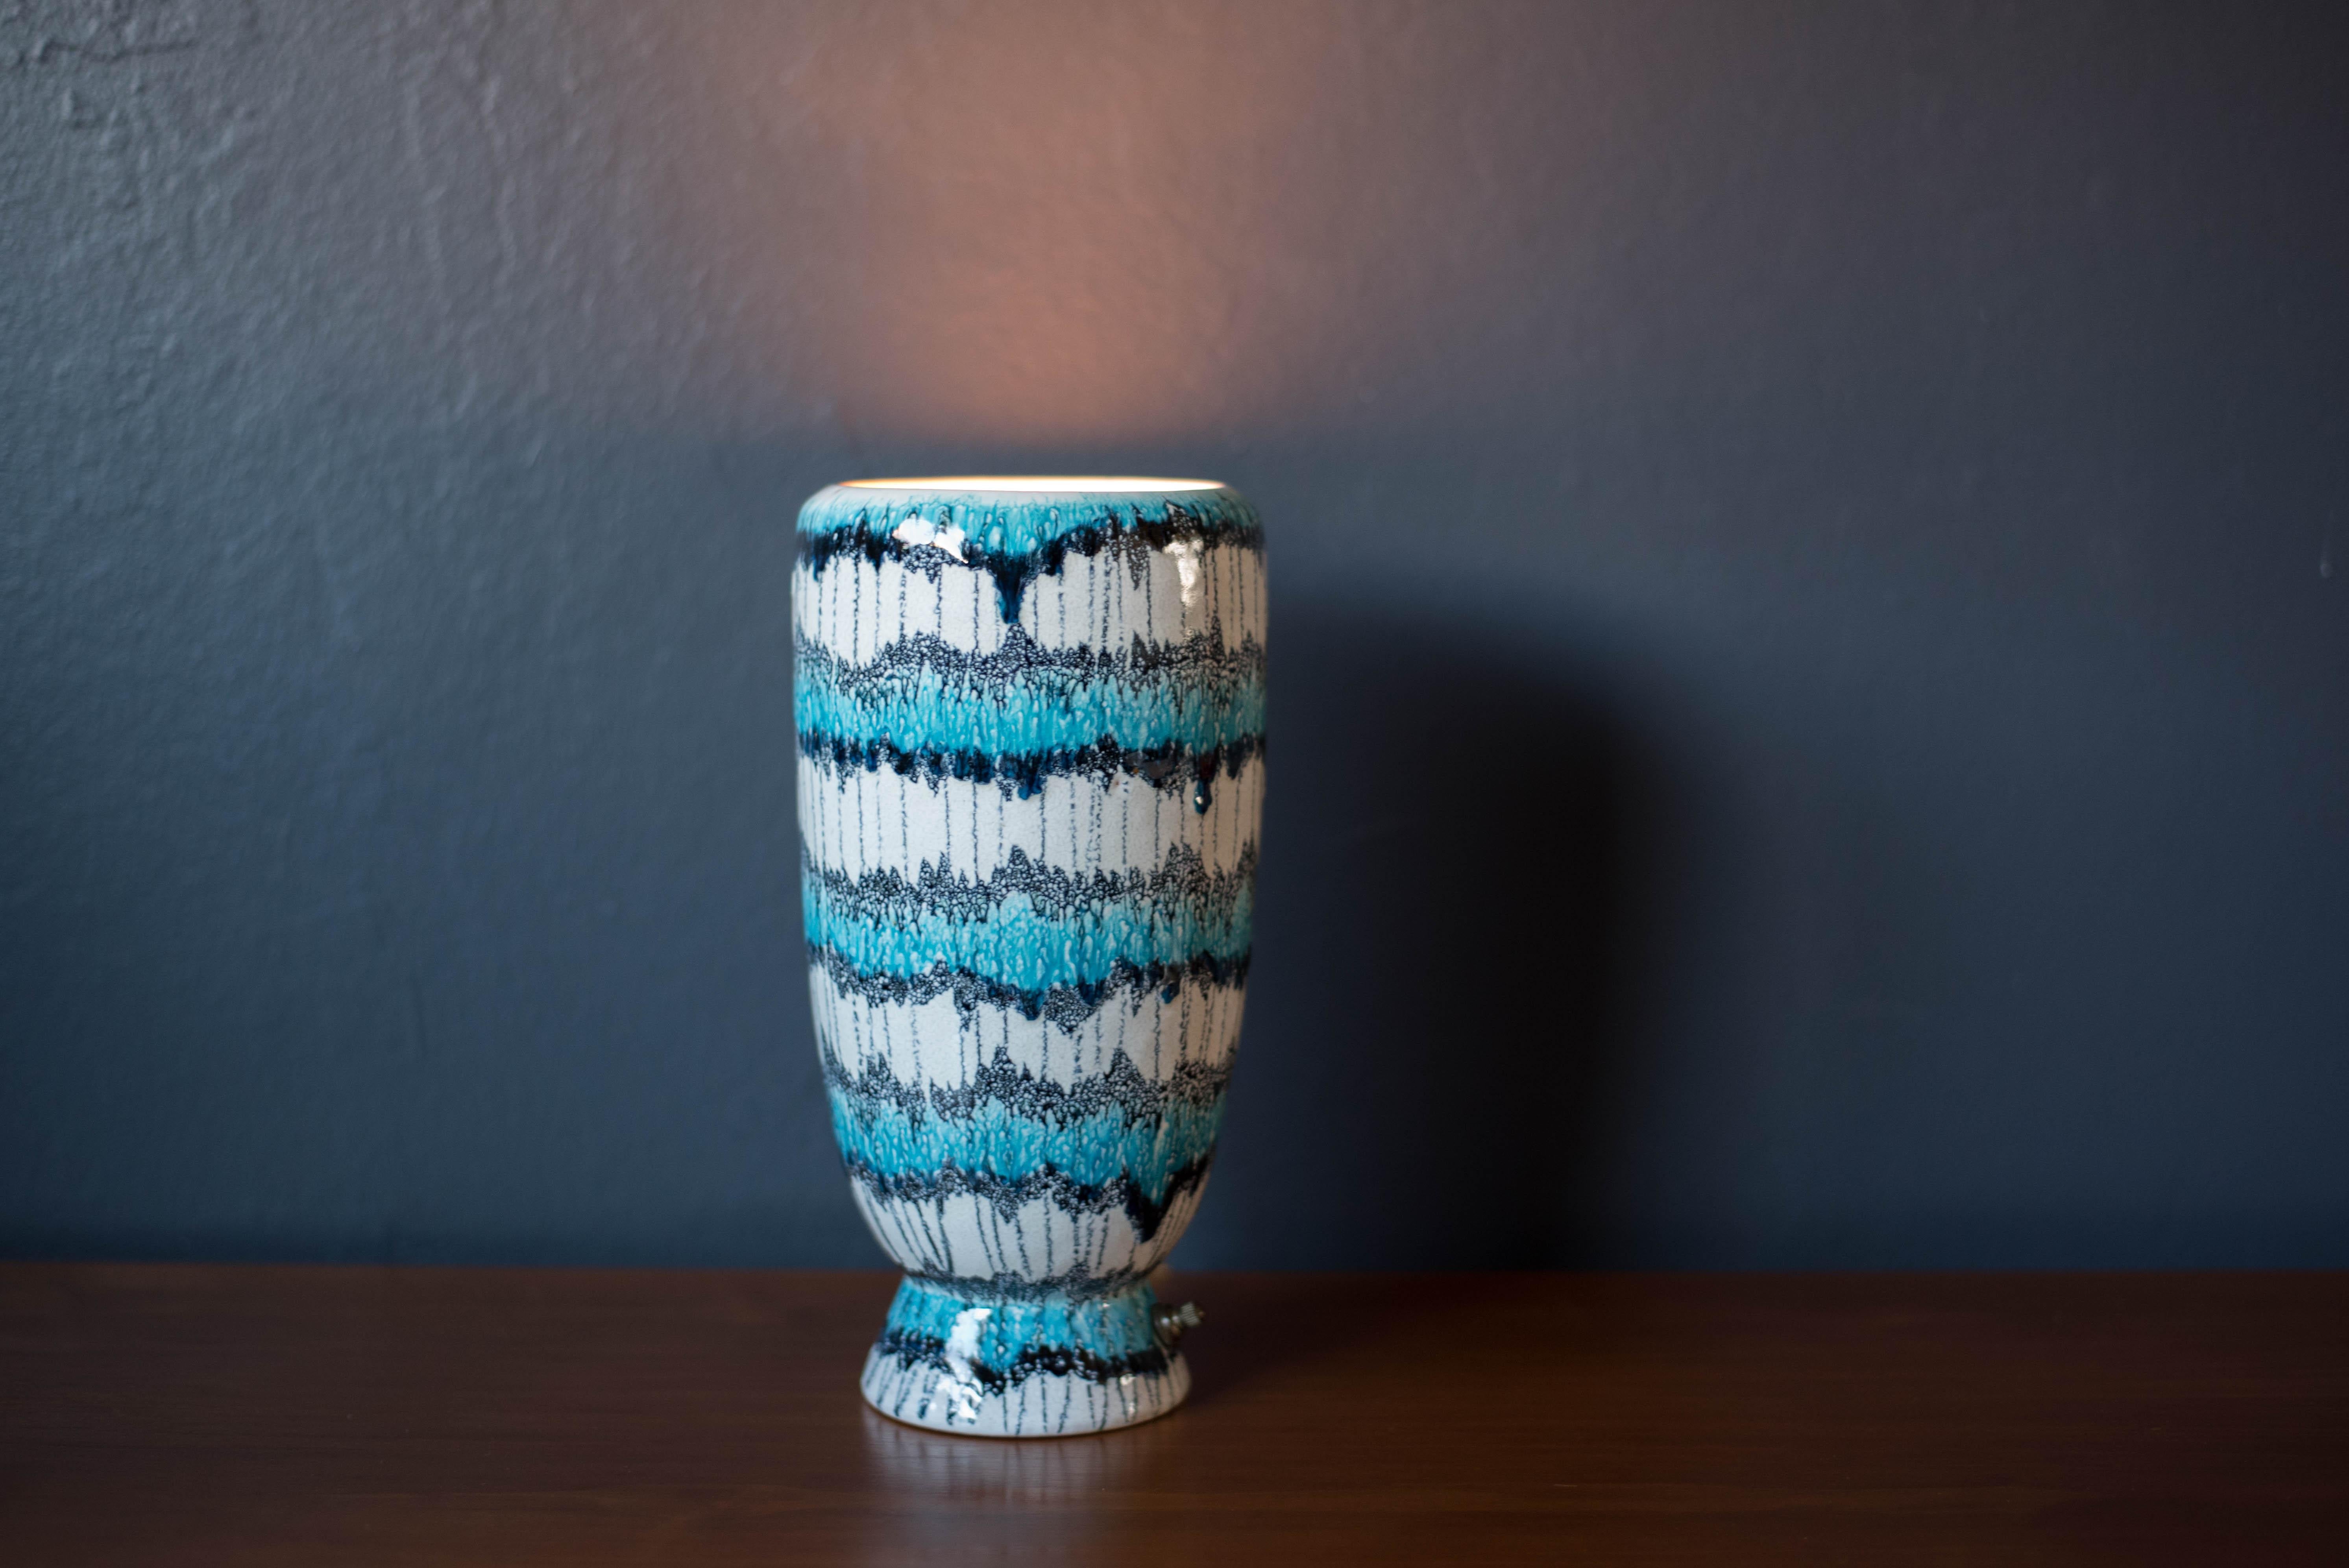 Mid century modern ceramic stoneware pottery table lamp circa 1960's. Features a white ceramic base with a bright color glaze finish in light blue and black. Equipped with a brass switch that emits a soft warm glow. Signed 'Crelsca' on the bottom. 